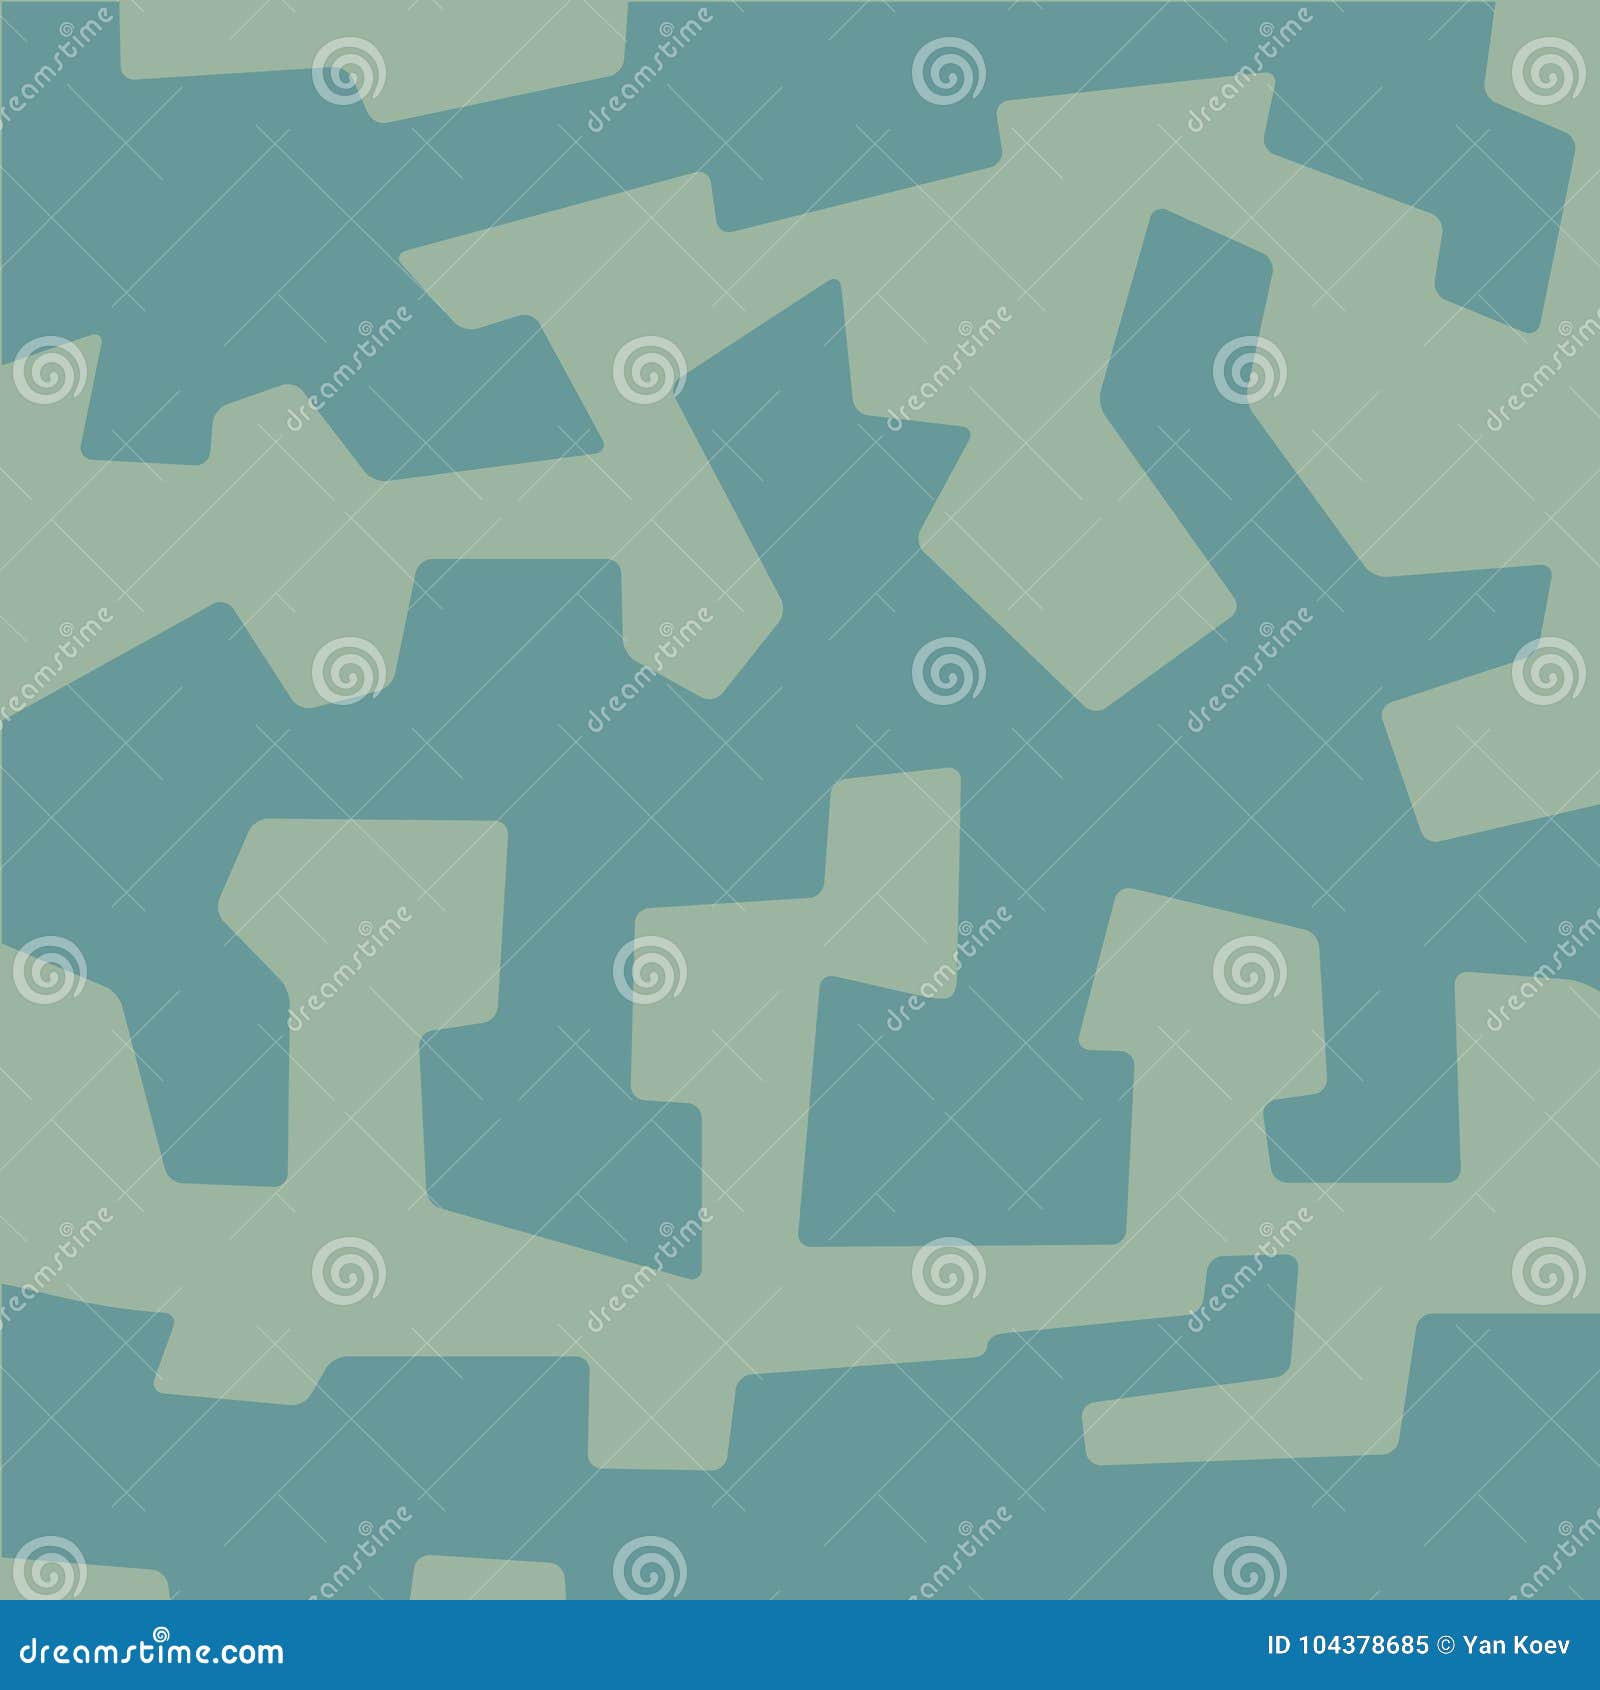 Abstract Geometric Corner Military Camouflage Background Stock Vector ...